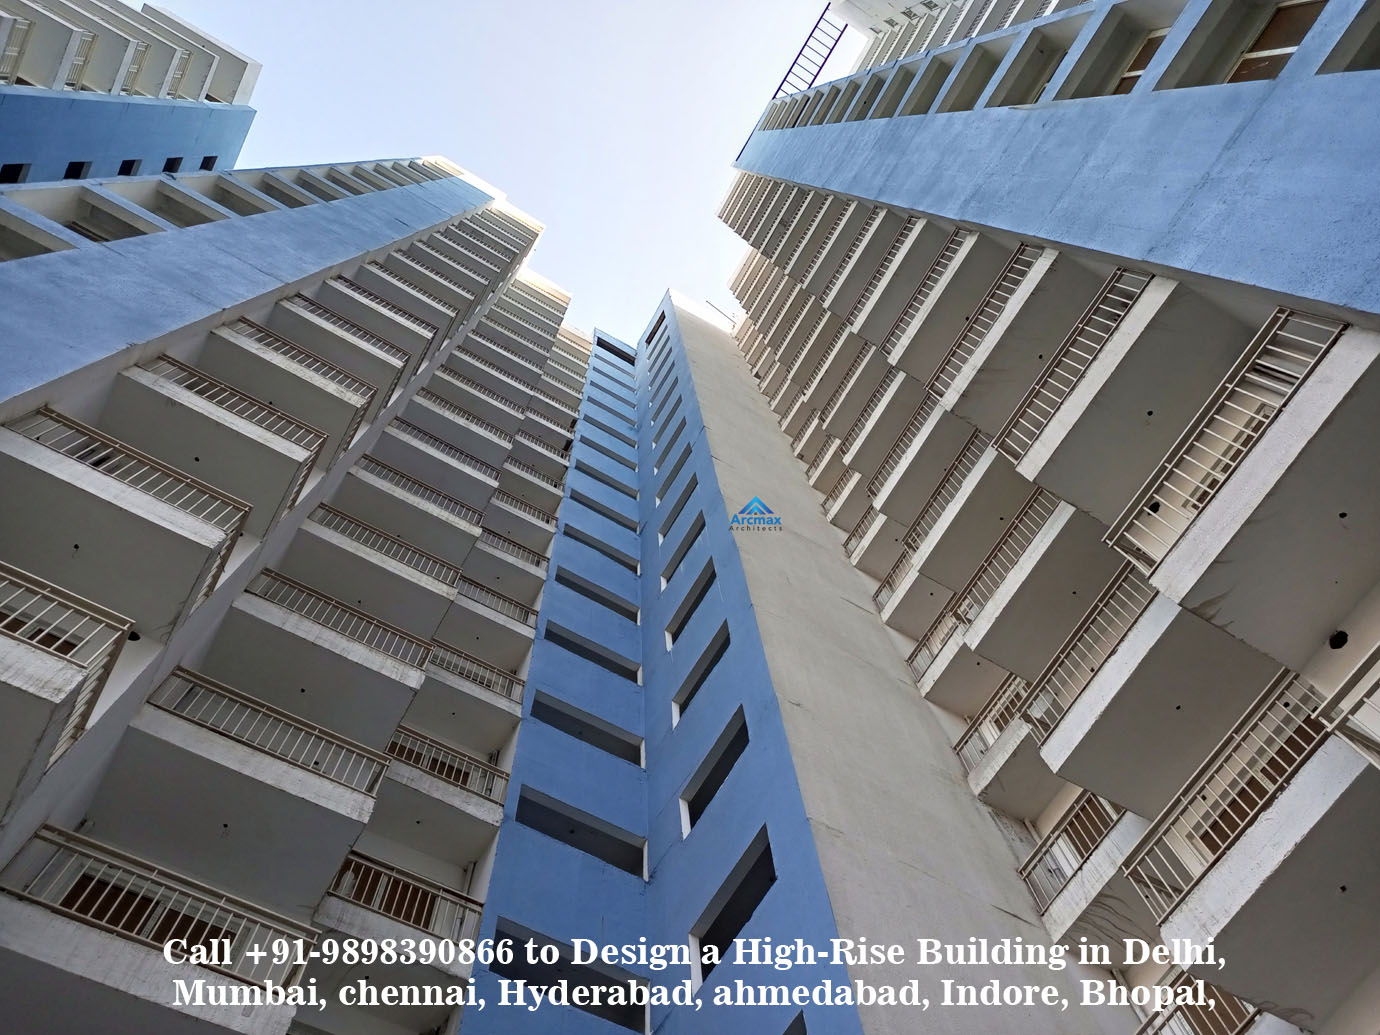 Design of a High-Rise Building-Best Practices for Safety and Stability